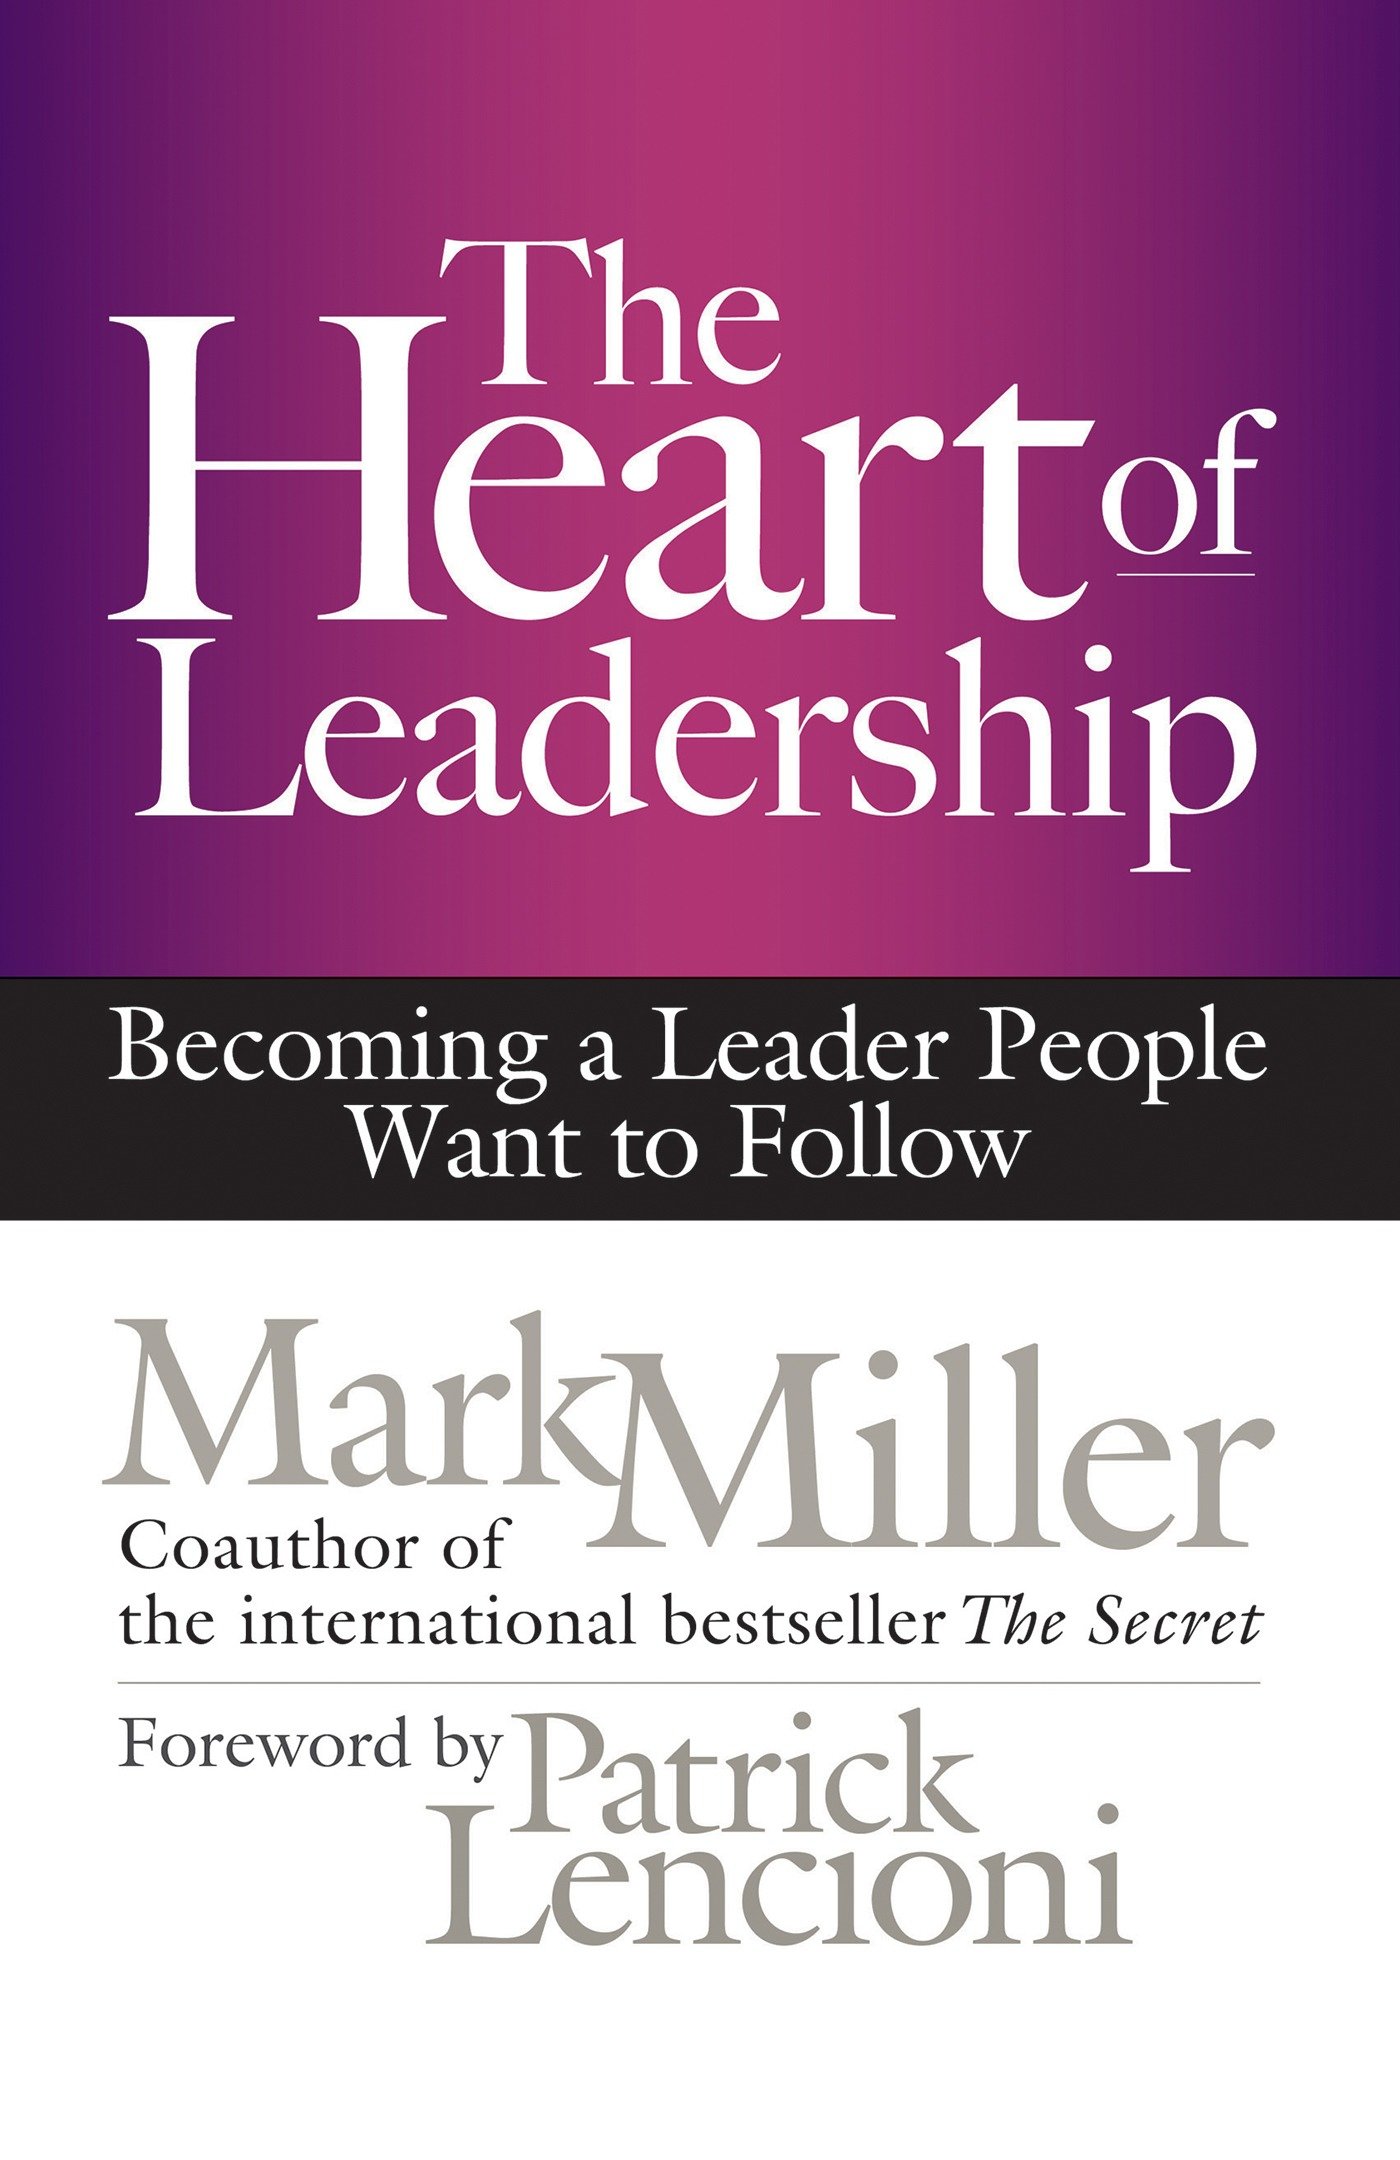 The Heart Of Leadership (Hardcover Book)